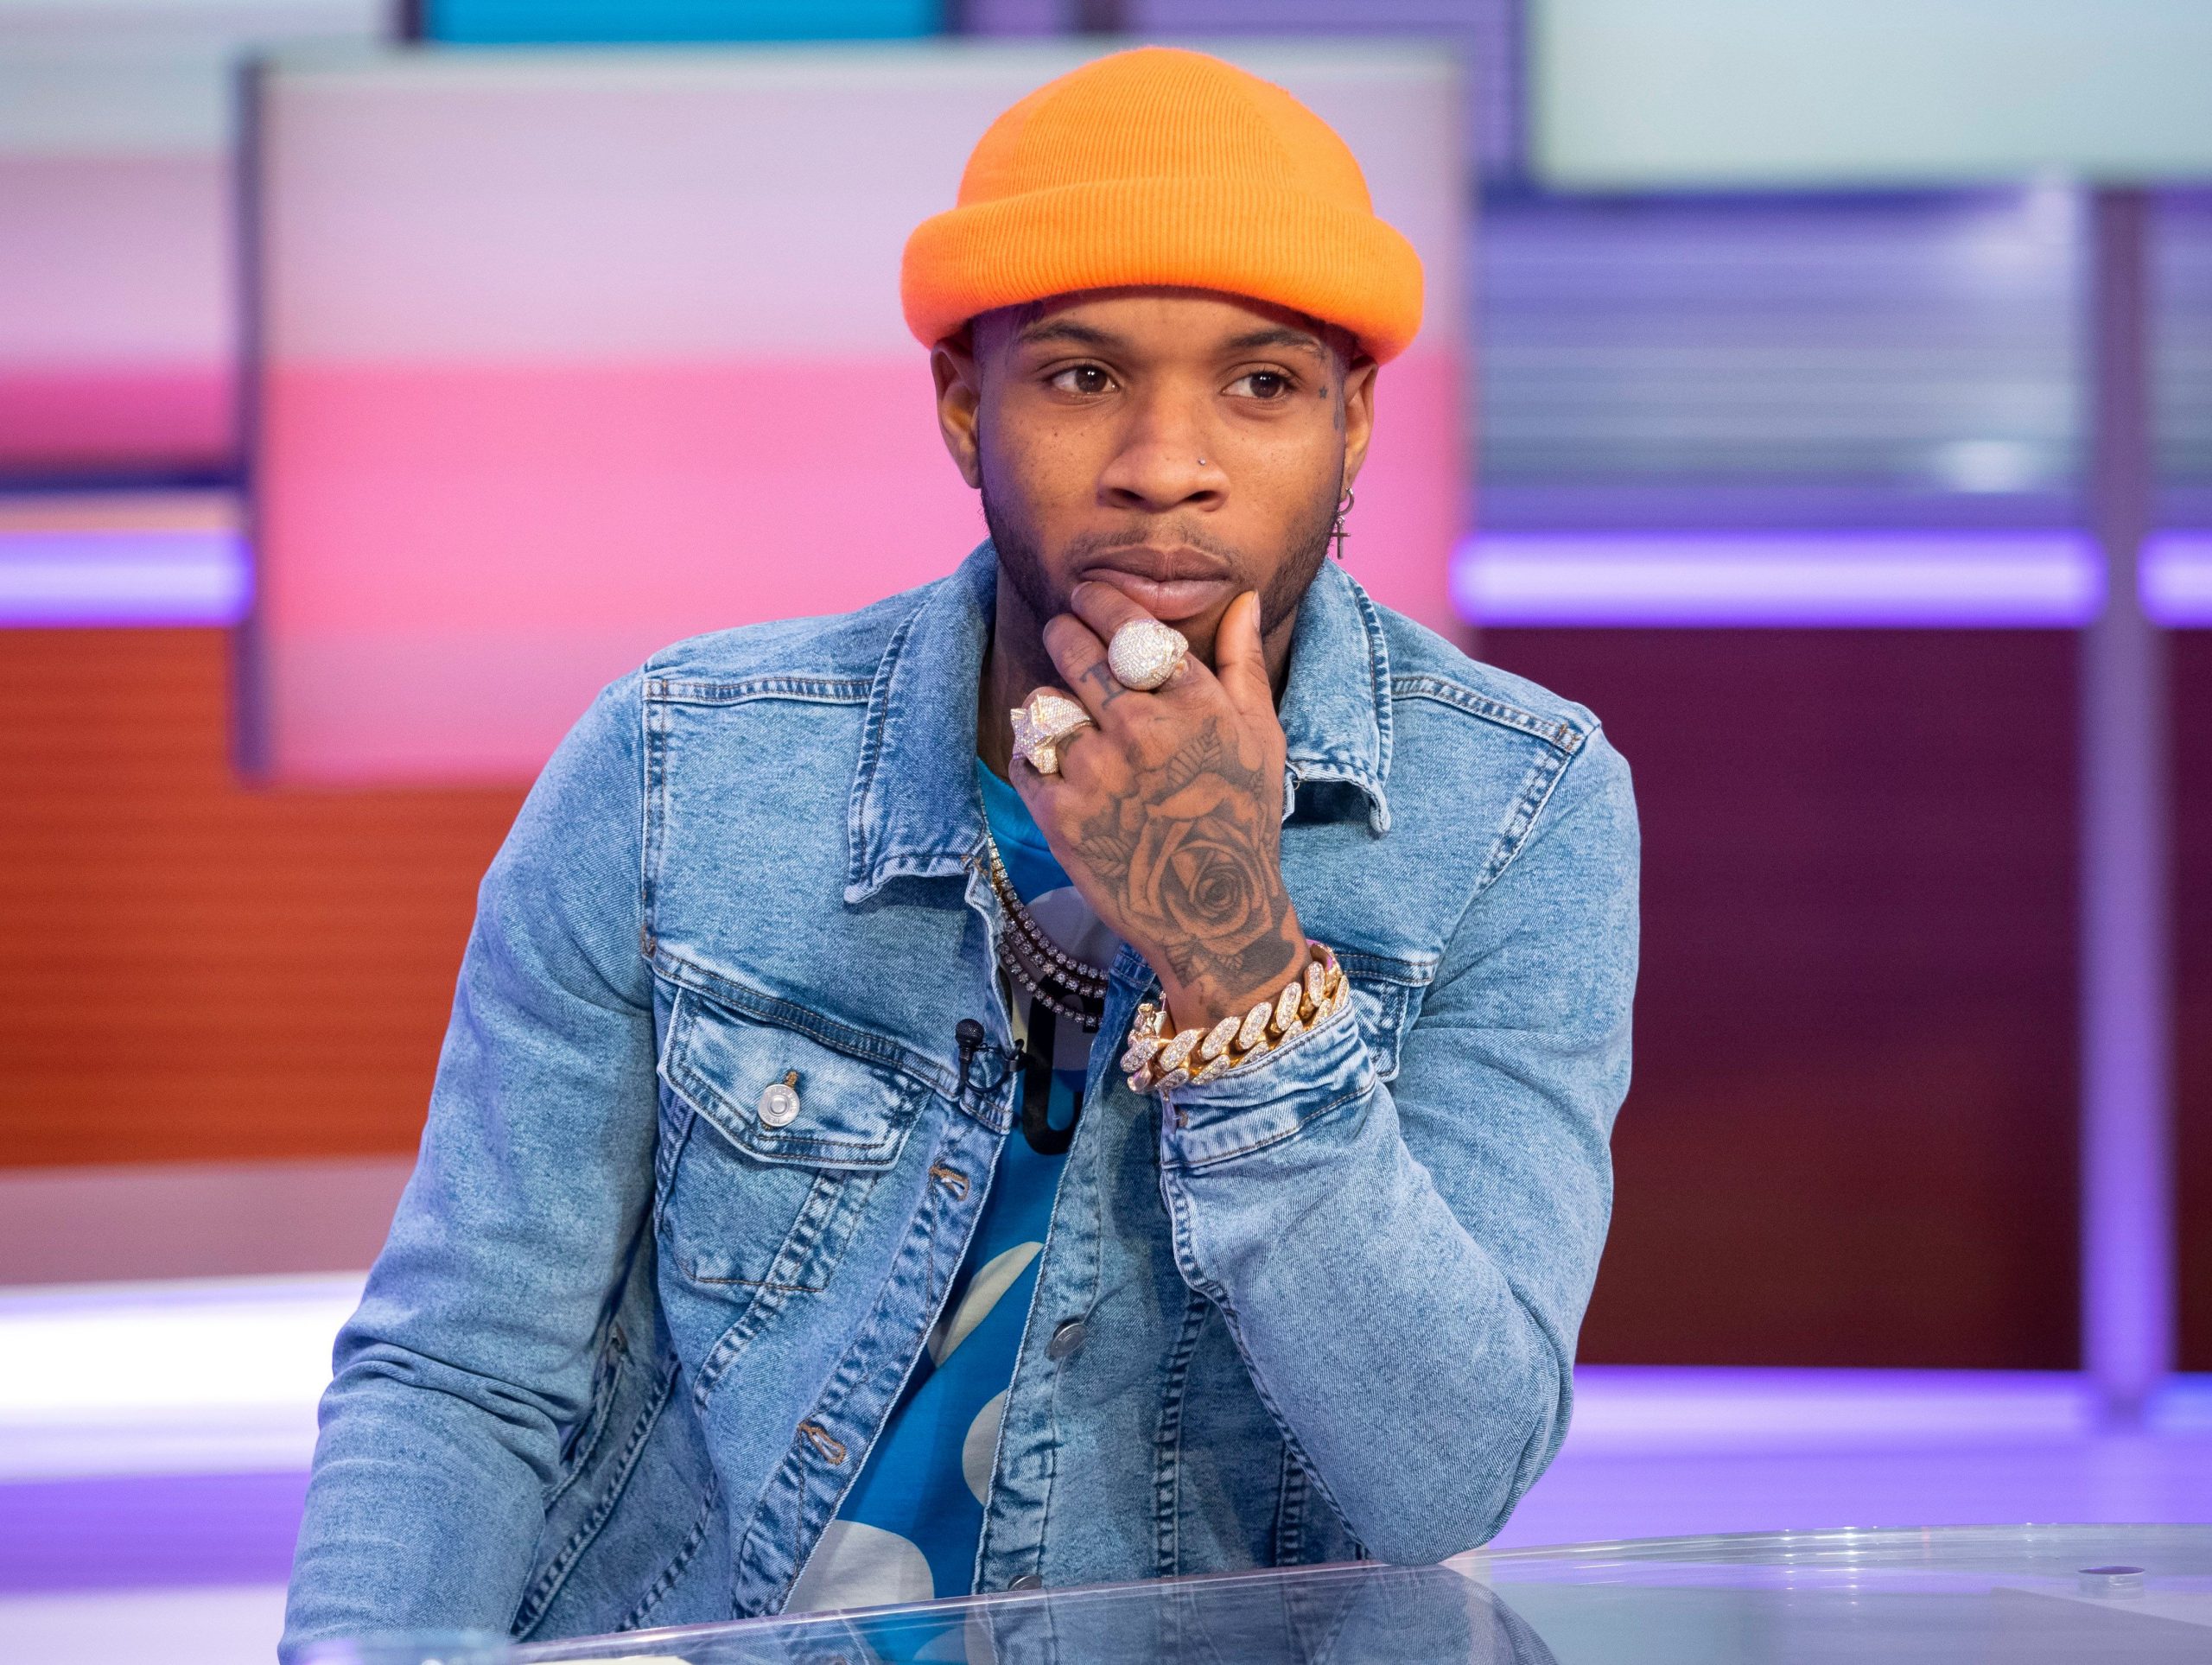 Tory Lanez To Supply Texas Victims With His Own Water Brand